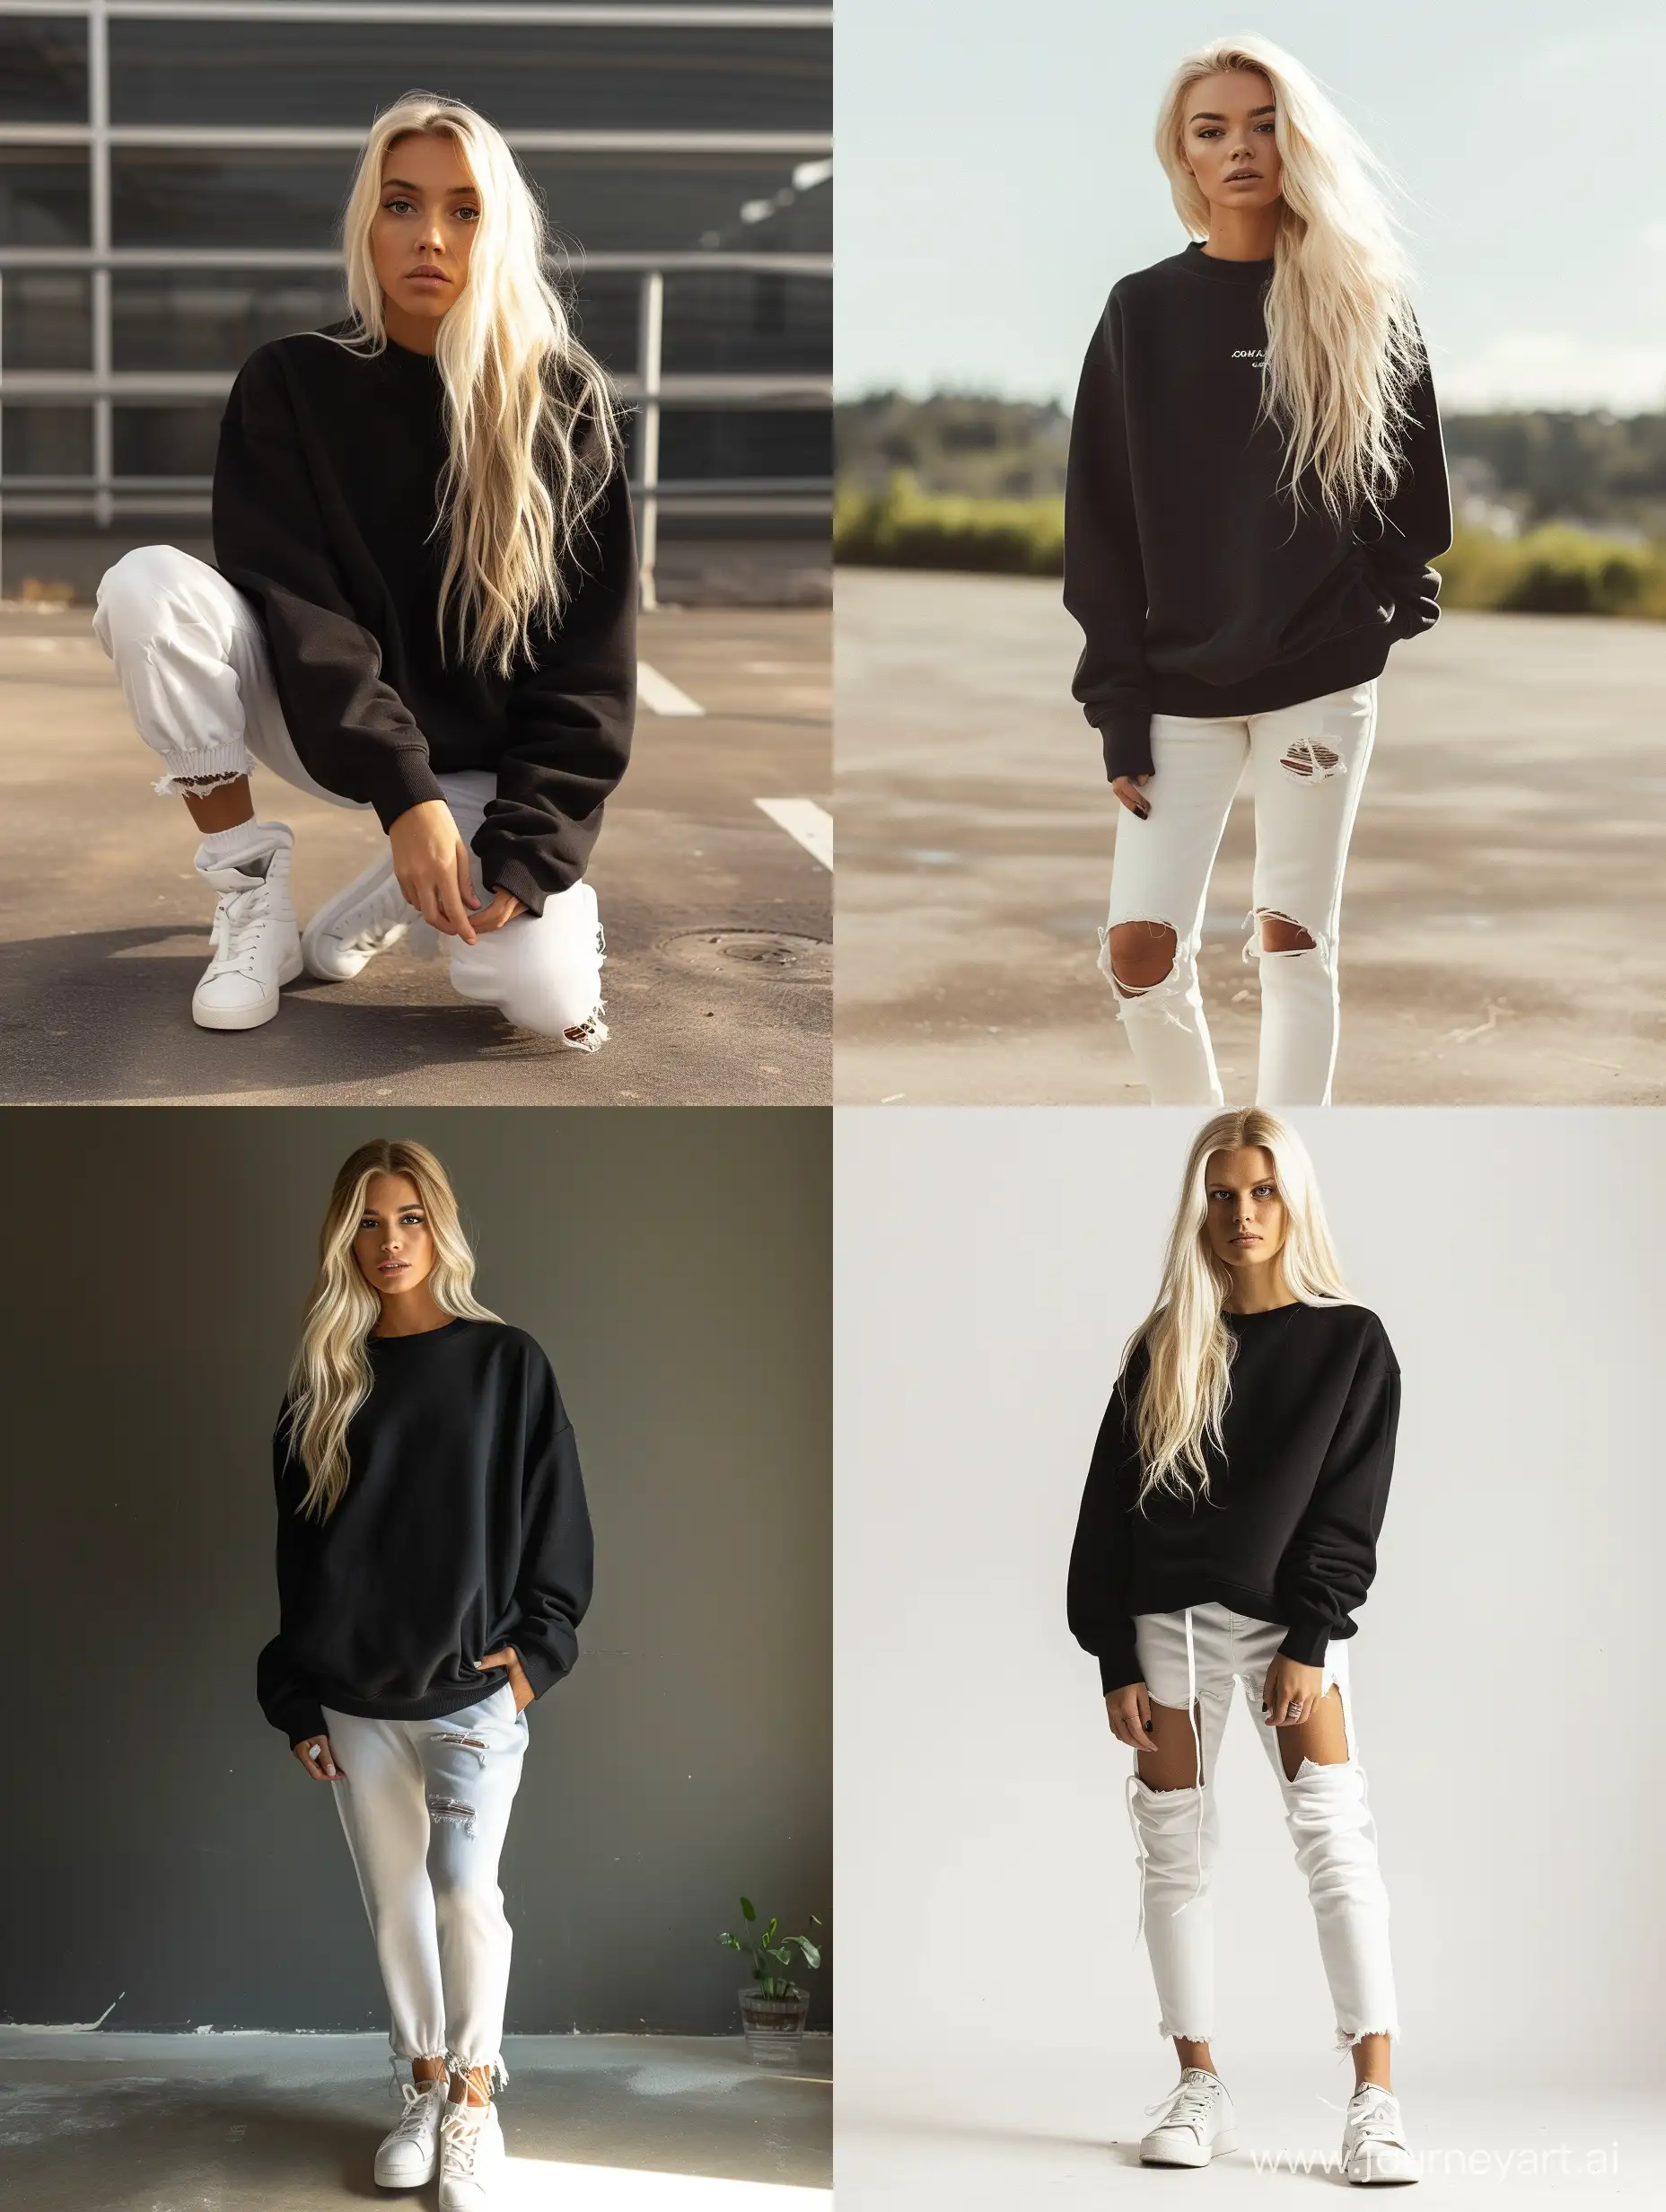 Blonde-Woman-in-Stylish-Black-and-White-Outfit-Standing-Full-Length